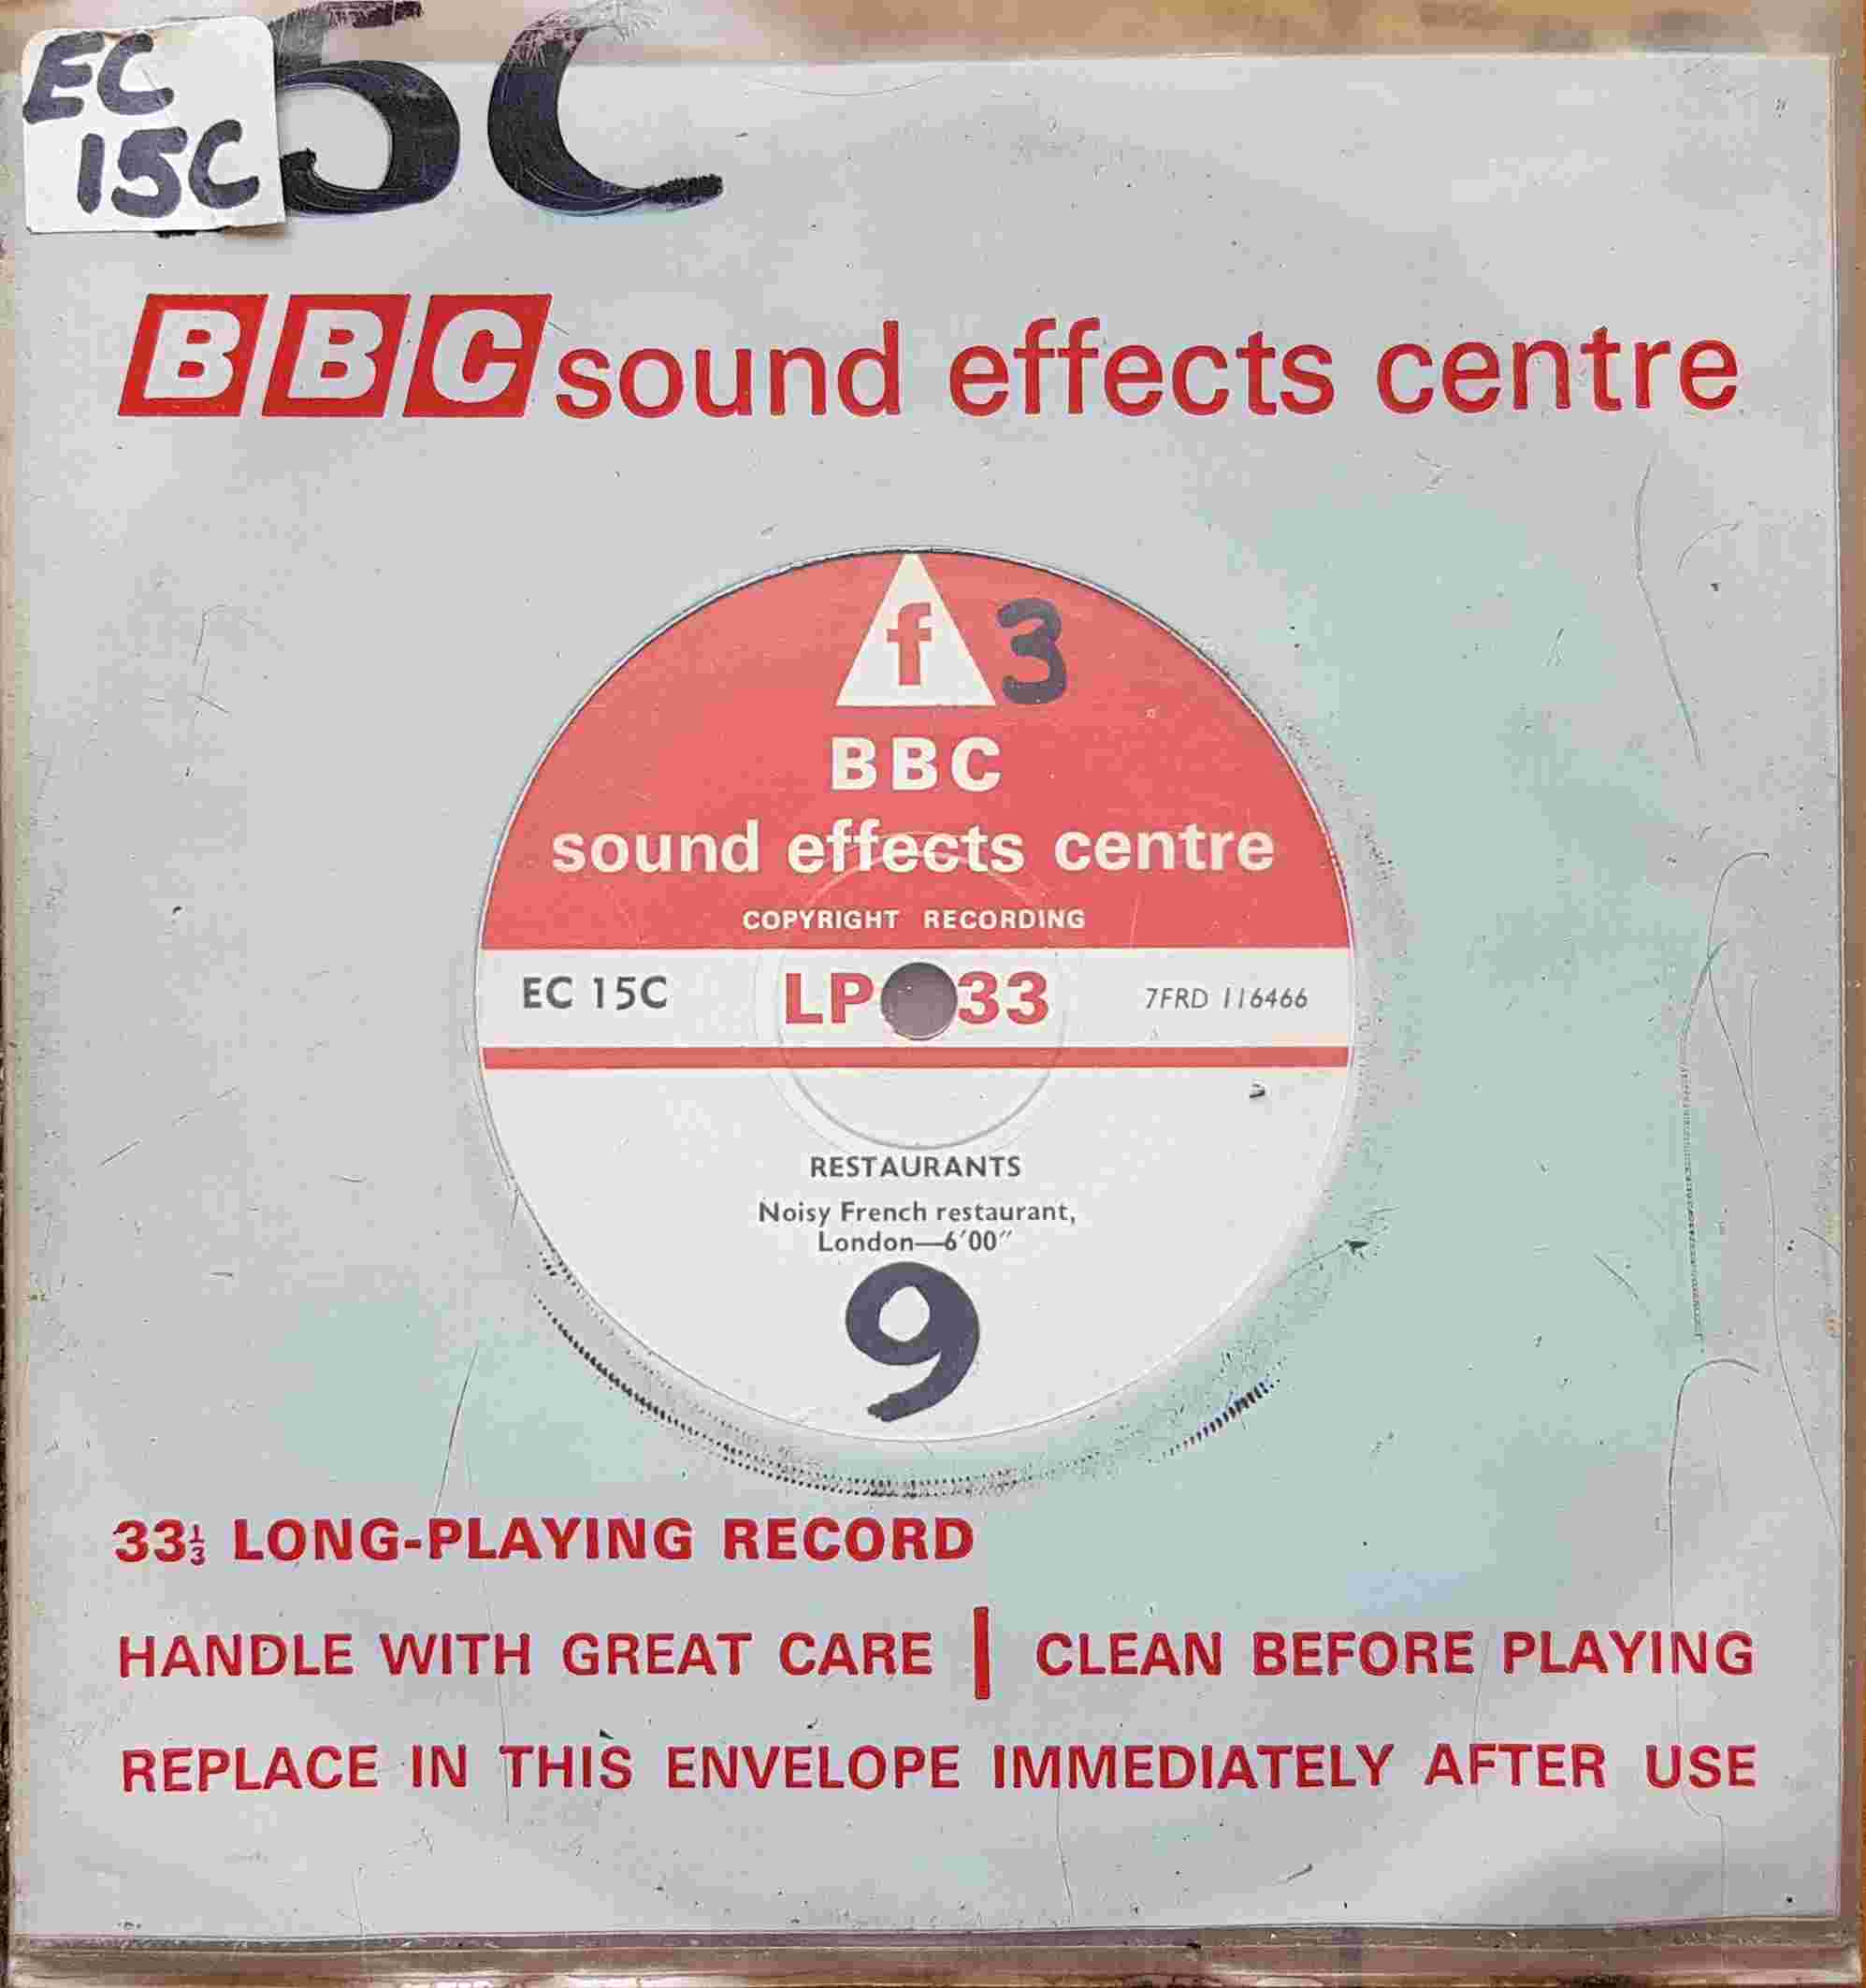 Picture of EC 15C Restaurants by artist Not registered from the BBC singles - Records and Tapes library